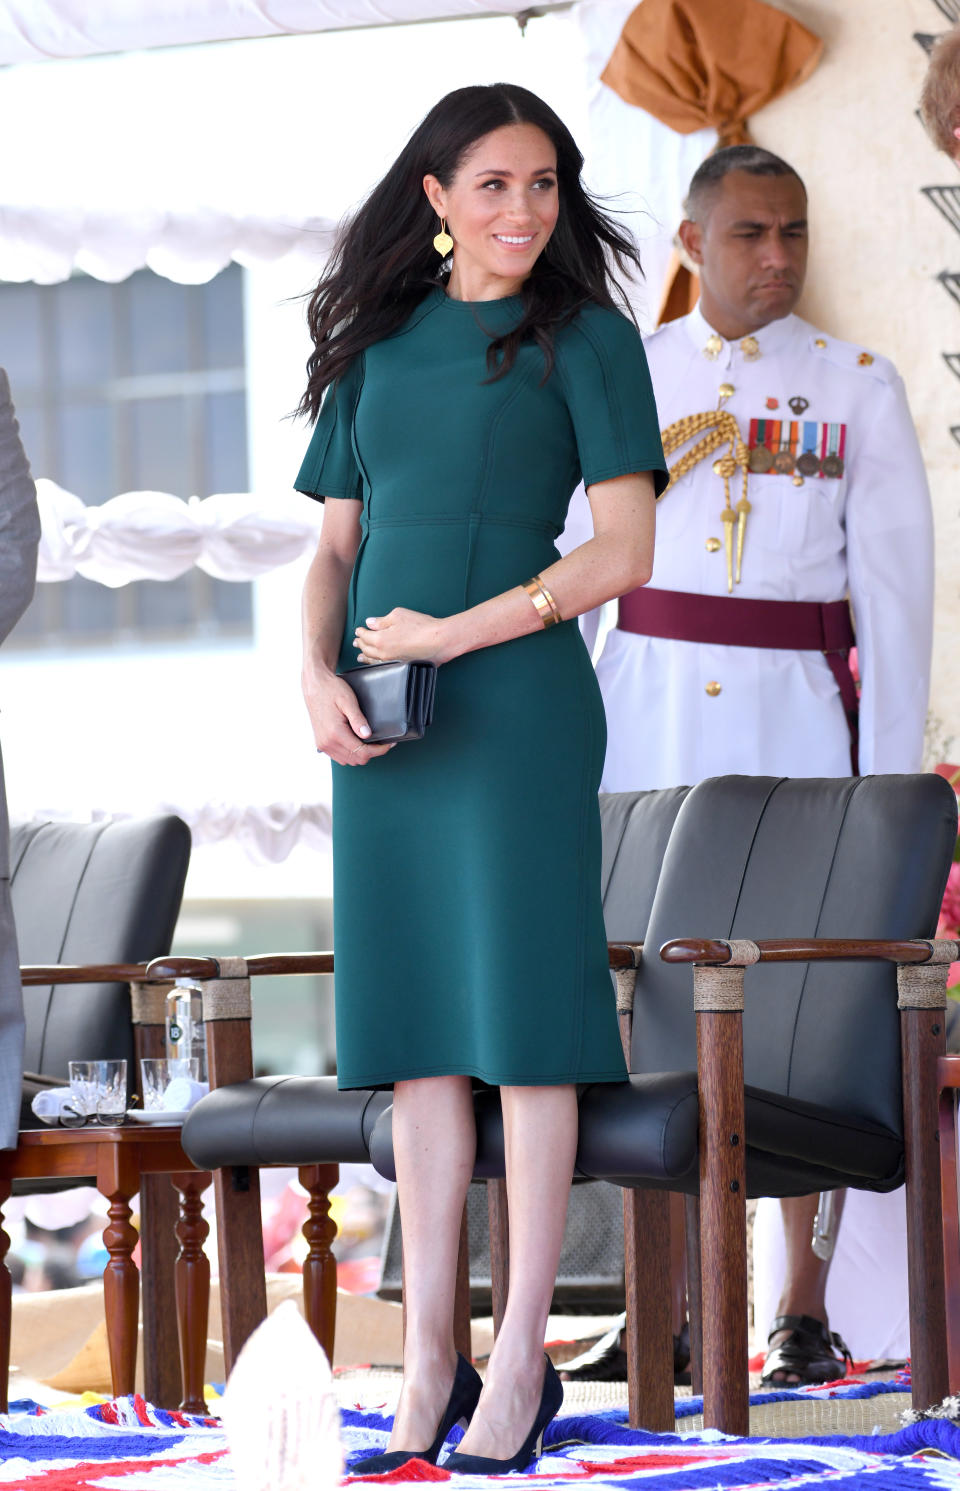 The pregnant Duchess promised the doctor she would take it easy. Photo: Getty Images